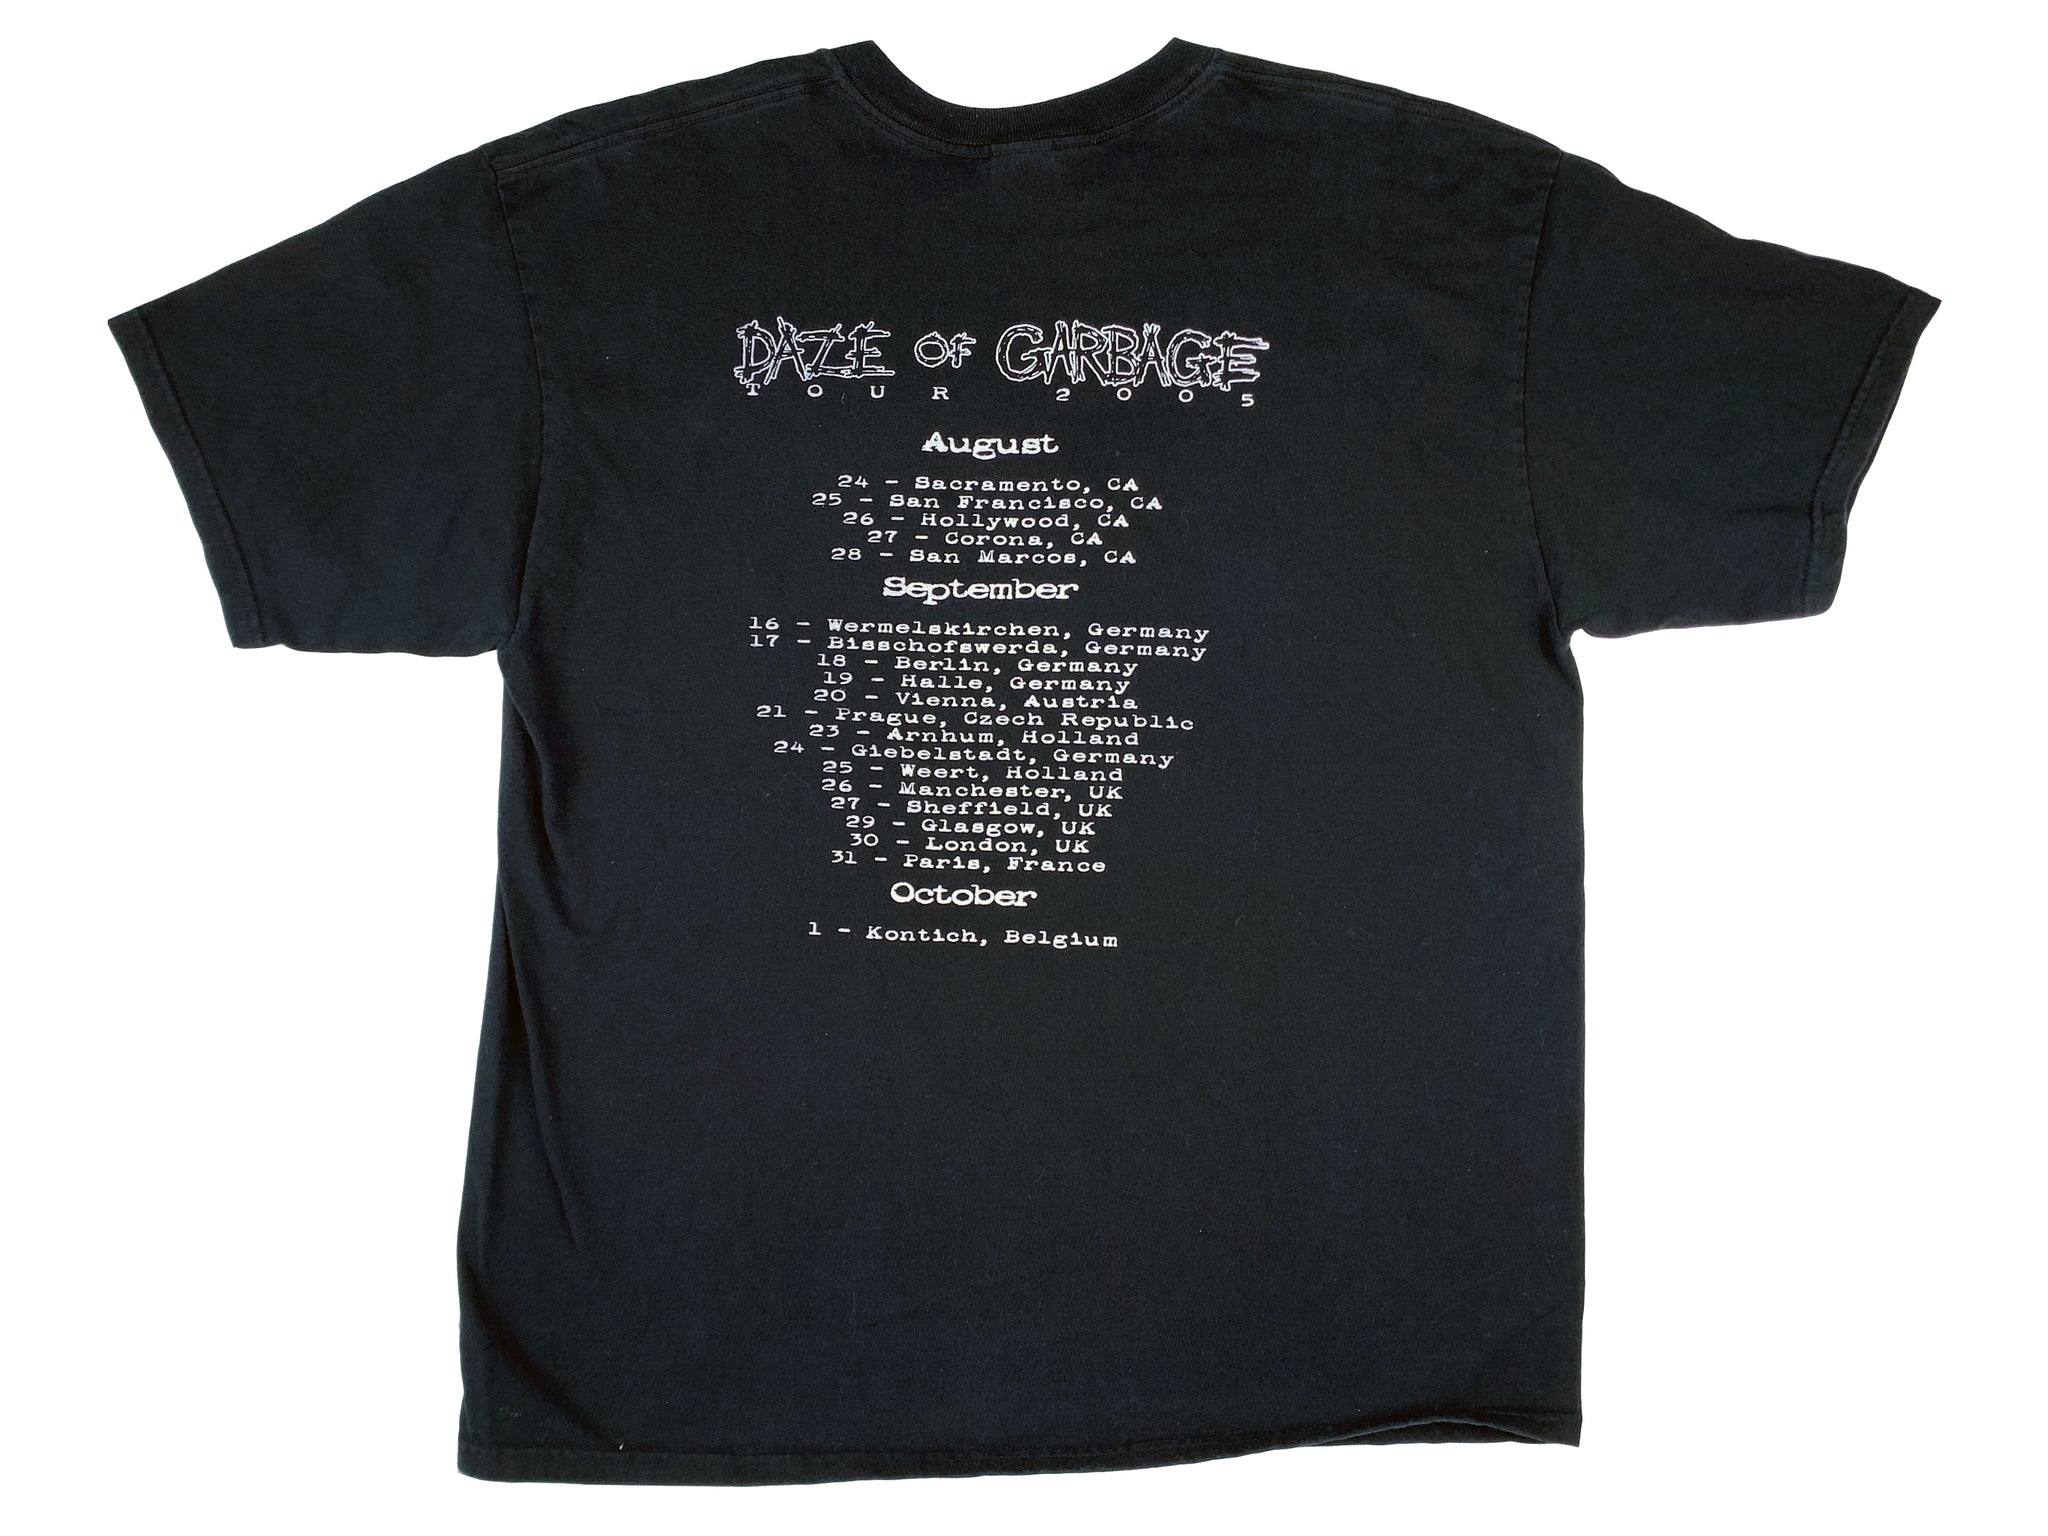 Exhumed Daze of Garbage Tour T-Shirt